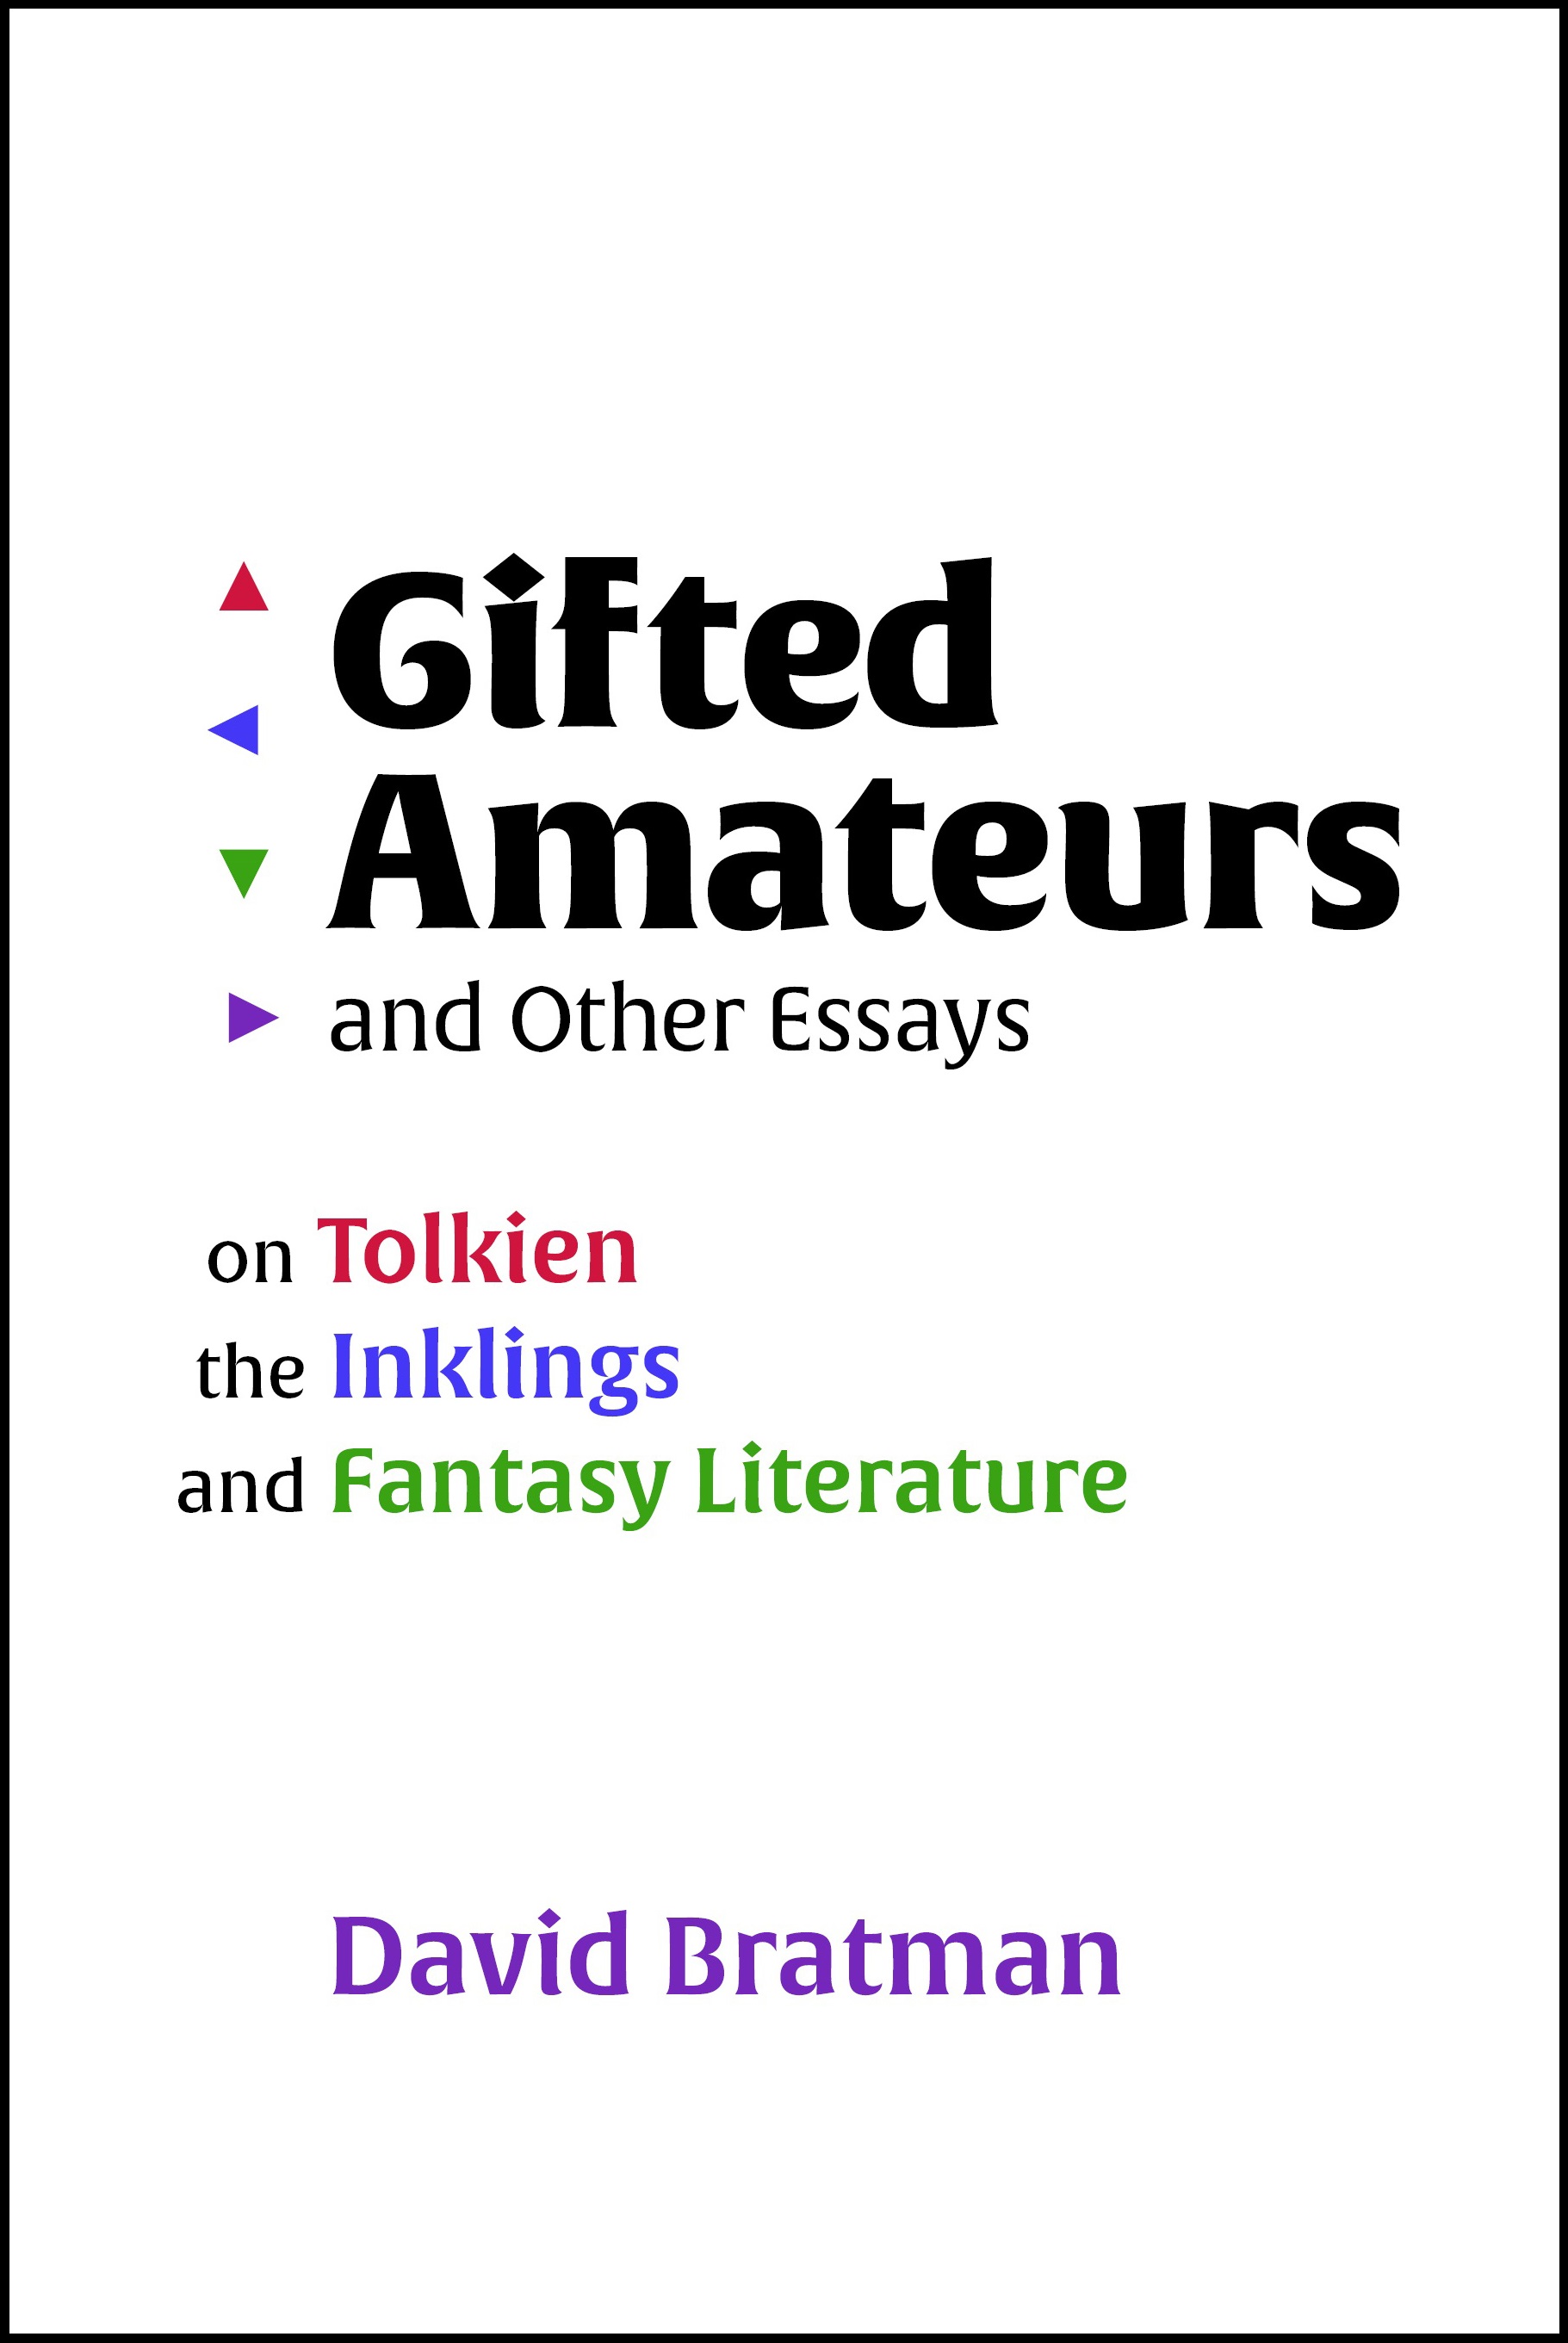 Gifted_Amateurs_Cover.jpg